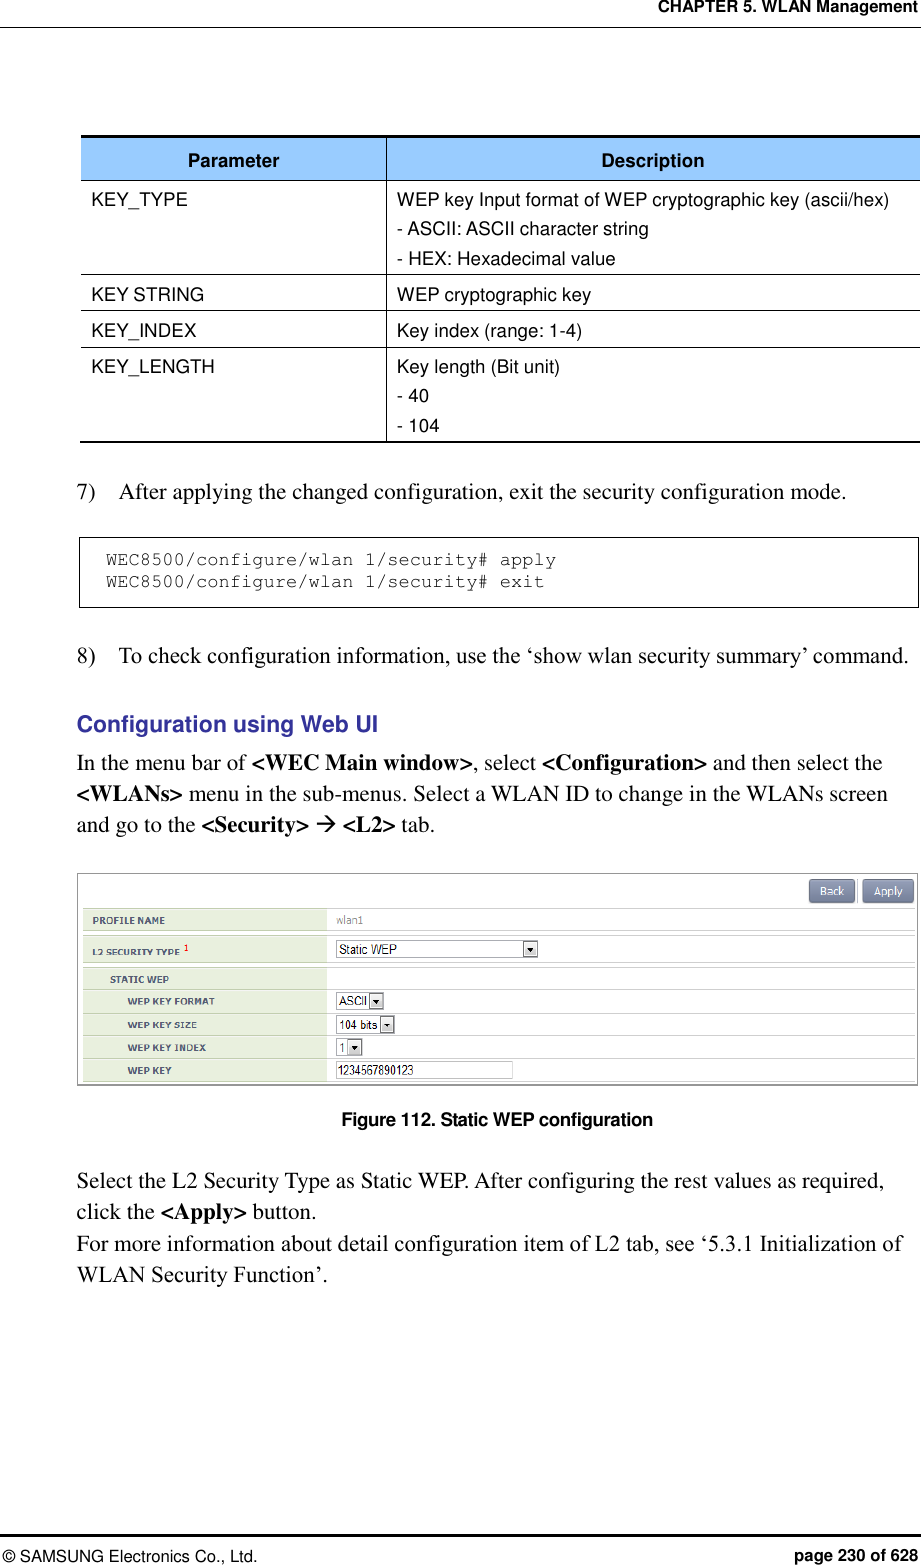 CHAPTER 5. WLAN Management ©  SAMSUNG Electronics Co., Ltd.  page 230 of 628  Parameter Description KEY_TYPE WEP key Input format of WEP cryptographic key (ascii/hex) - ASCII: ASCII character string - HEX: Hexadecimal value KEY STRING WEP cryptographic key KEY_INDEX Key index (range: 1-4) KEY_LENGTH Key length (Bit unit) - 40 - 104  7)    After applying the changed configuration, exit the security configuration mode.  WEC8500/configure/wlan 1/security# apply WEC8500/configure/wlan 1/security# exit  8)    To check configuration information, use the ‘show wlan security summary’ command.  Configuration using Web UI In the menu bar of &lt;WEC Main window&gt;, select &lt;Configuration&gt; and then select the &lt;WLANs&gt; menu in the sub-menus. Select a WLAN ID to change in the WLANs screen and go to the &lt;Security&gt;  &lt;L2&gt; tab.  Figure 112. Static WEP configuration  Select the L2 Security Type as Static WEP. After configuring the rest values as required, click the &lt;Apply&gt; button. For more information about detail configuration item of L2 tab, see ‘5.3.1 Initialization of WLAN Security Function’.  